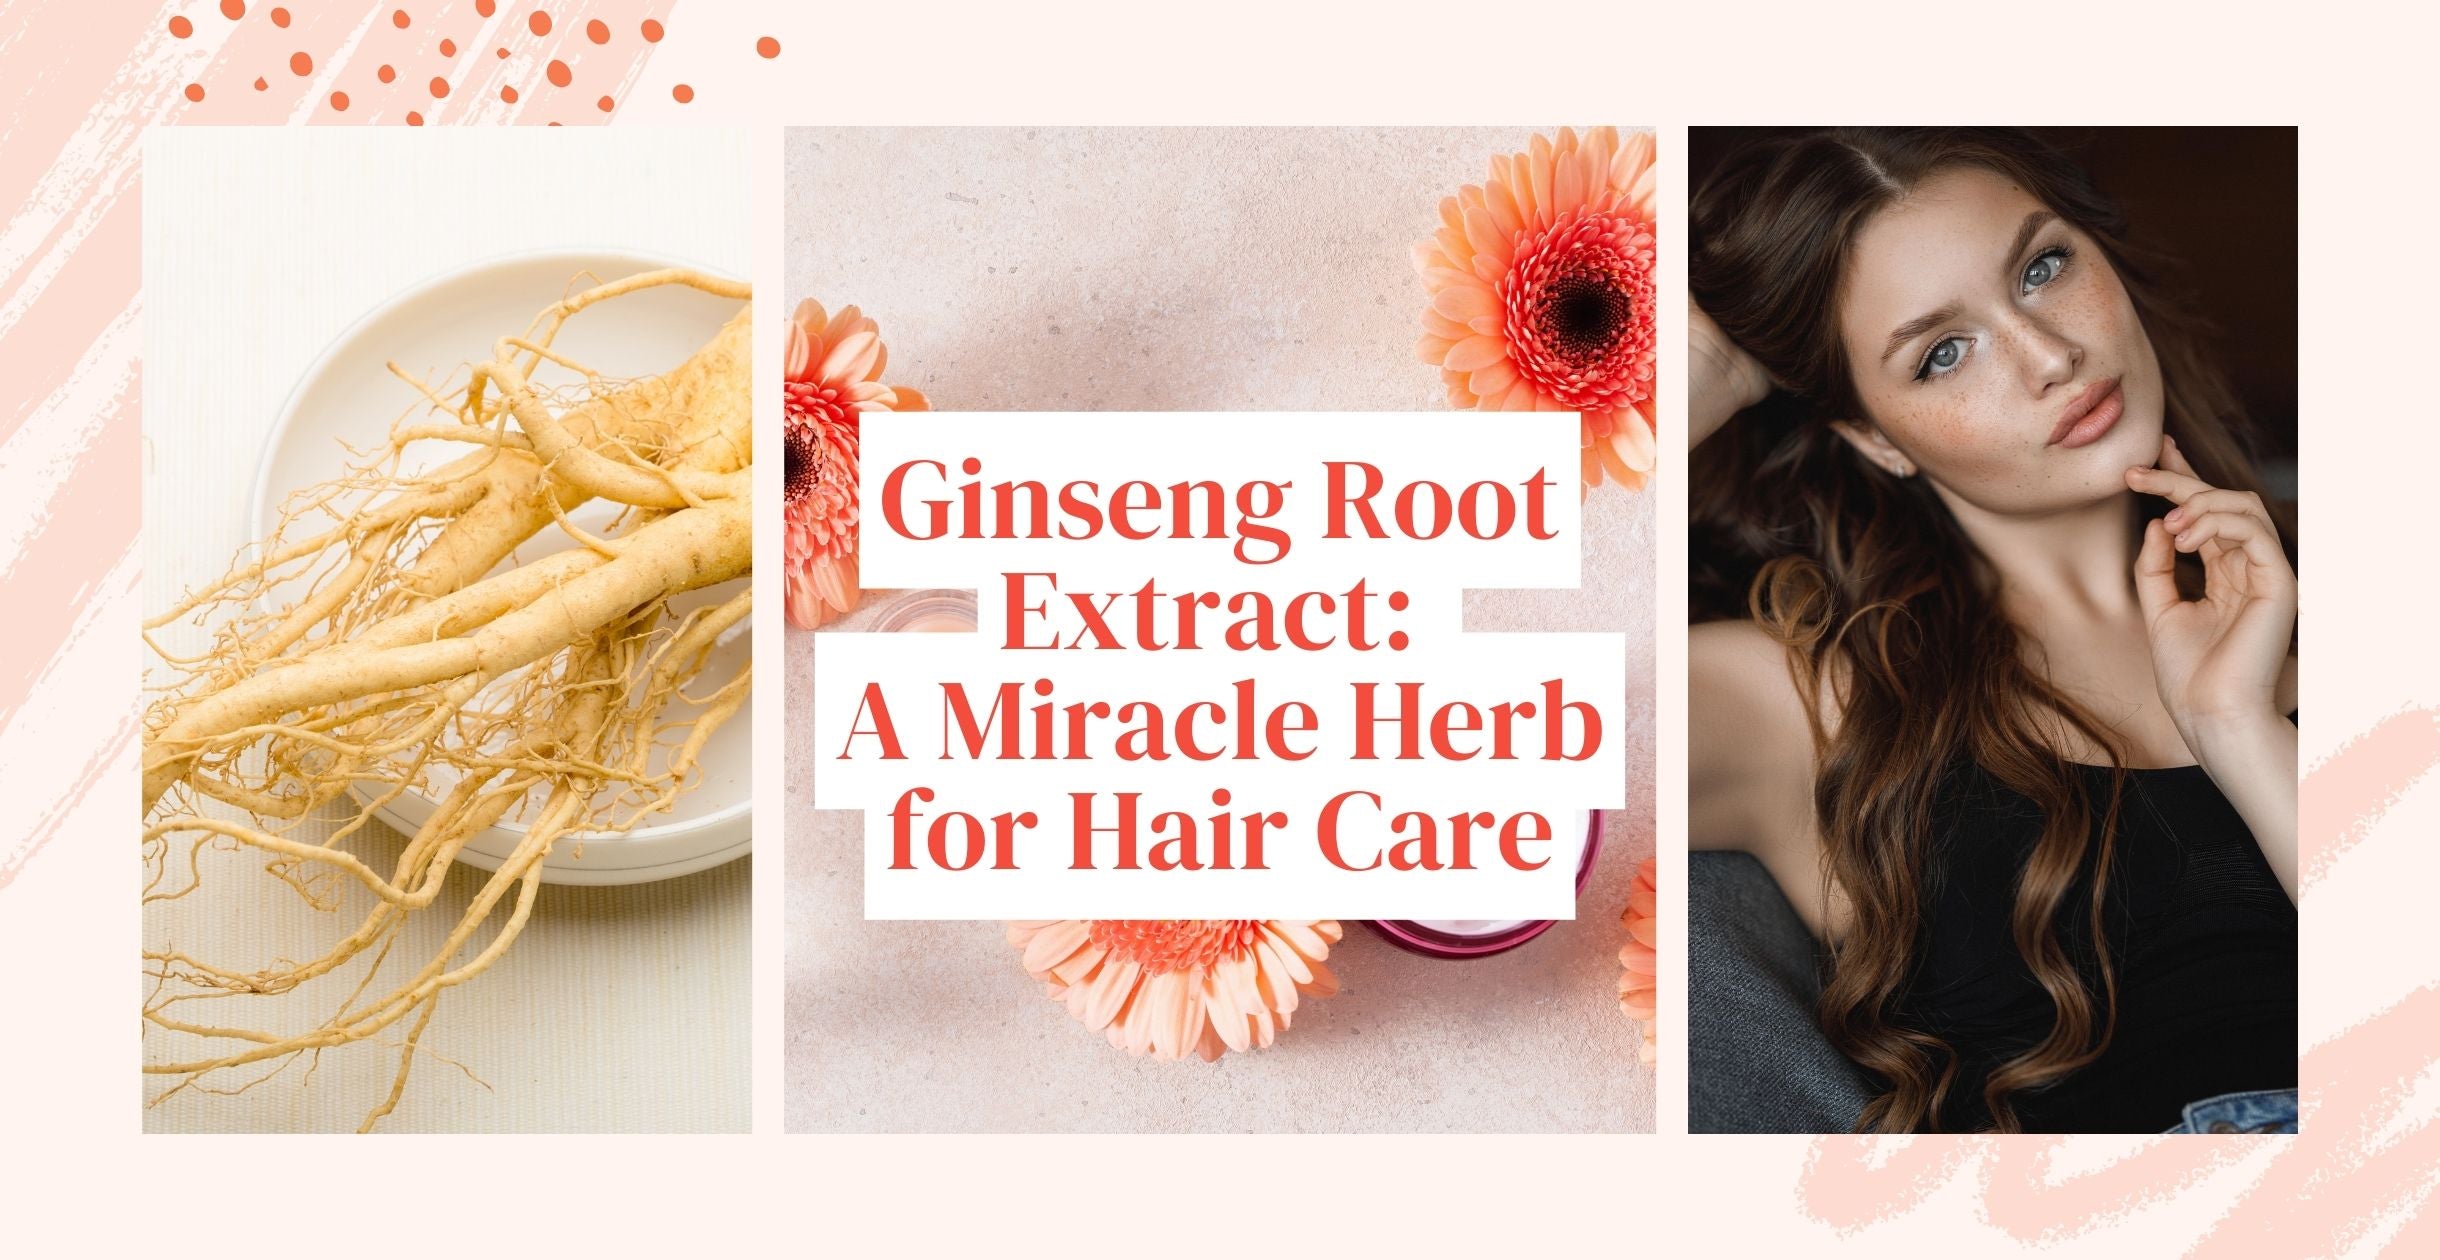 Ginseng Root Extract: A Miracle Herb for Hair Care